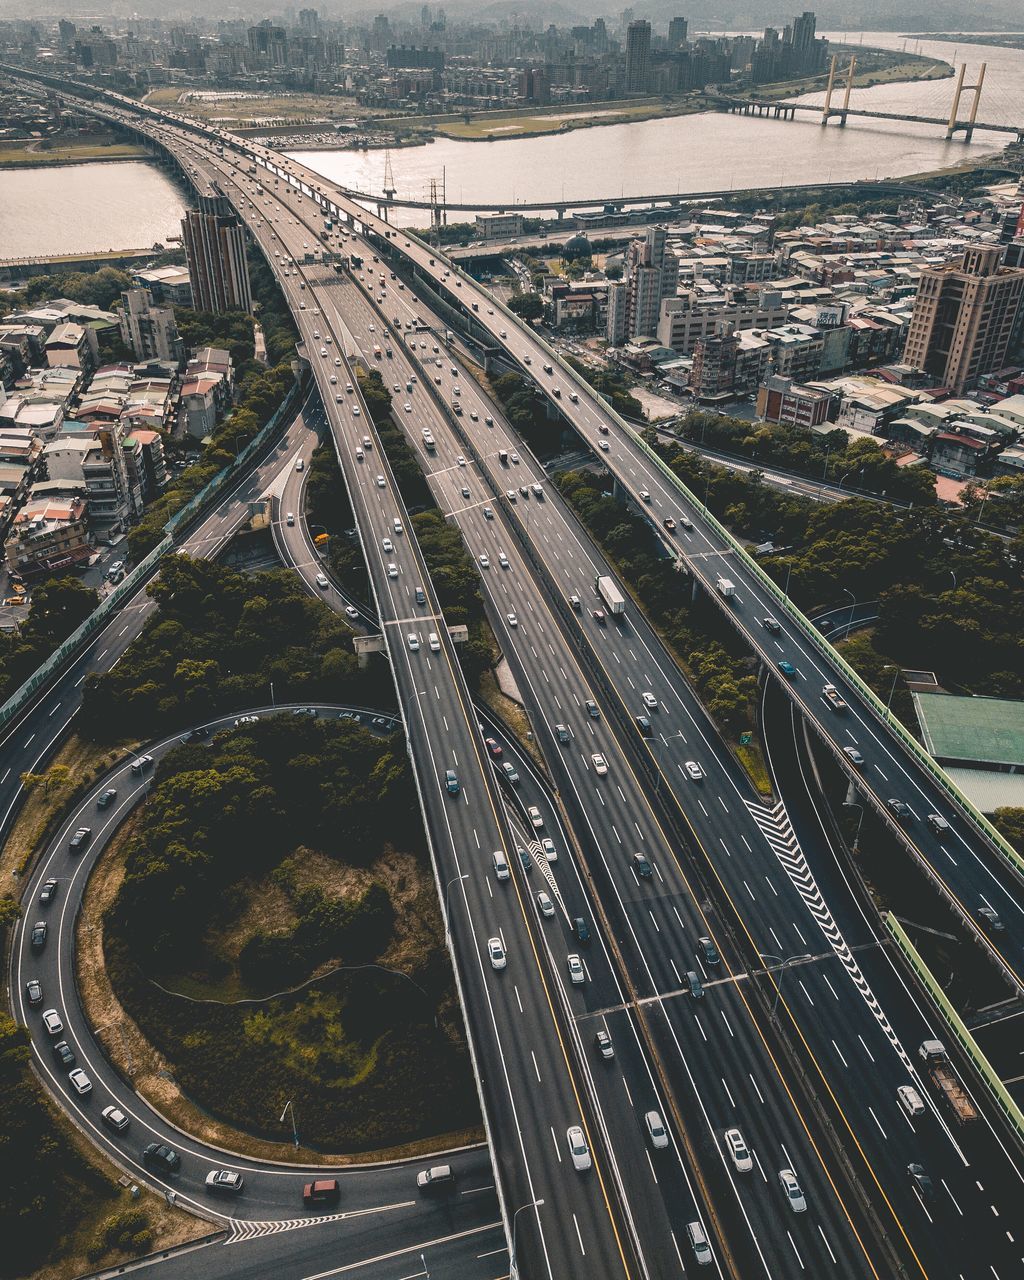 transportation, connection, traffic, bridge - man made structure, city, architecture, road, highway, car, elevated road, aerial view, overpass, mode of transport, high angle view, land vehicle, road intersection, motion, built structure, cityscape, no people, modern, outdoors, day